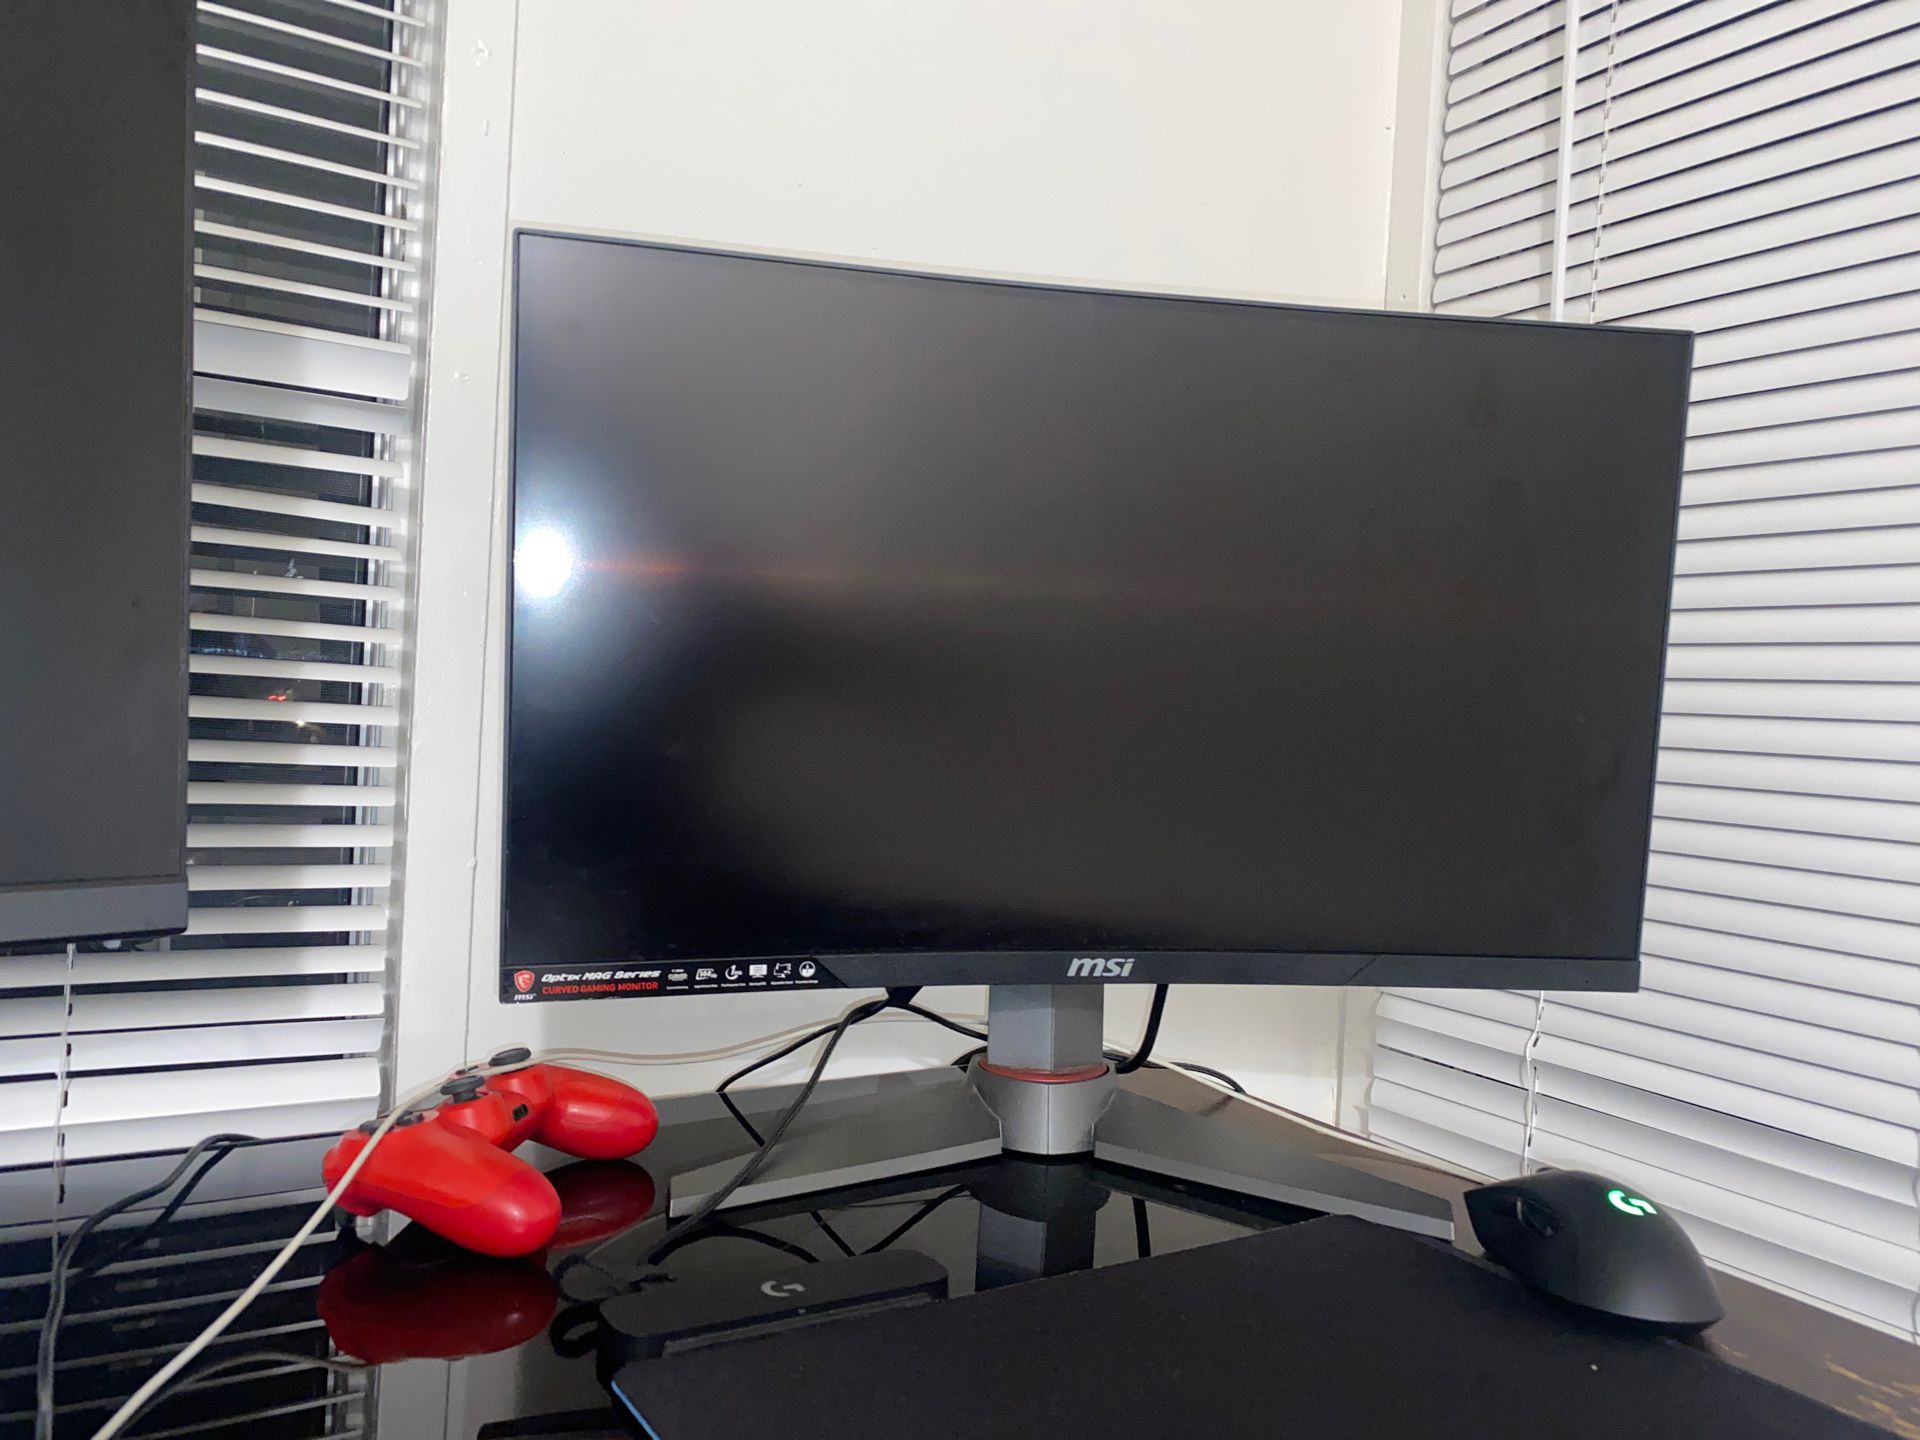 Acer 27 in 144hz and optix curved 144hz monitor BOTH SOLD Separate